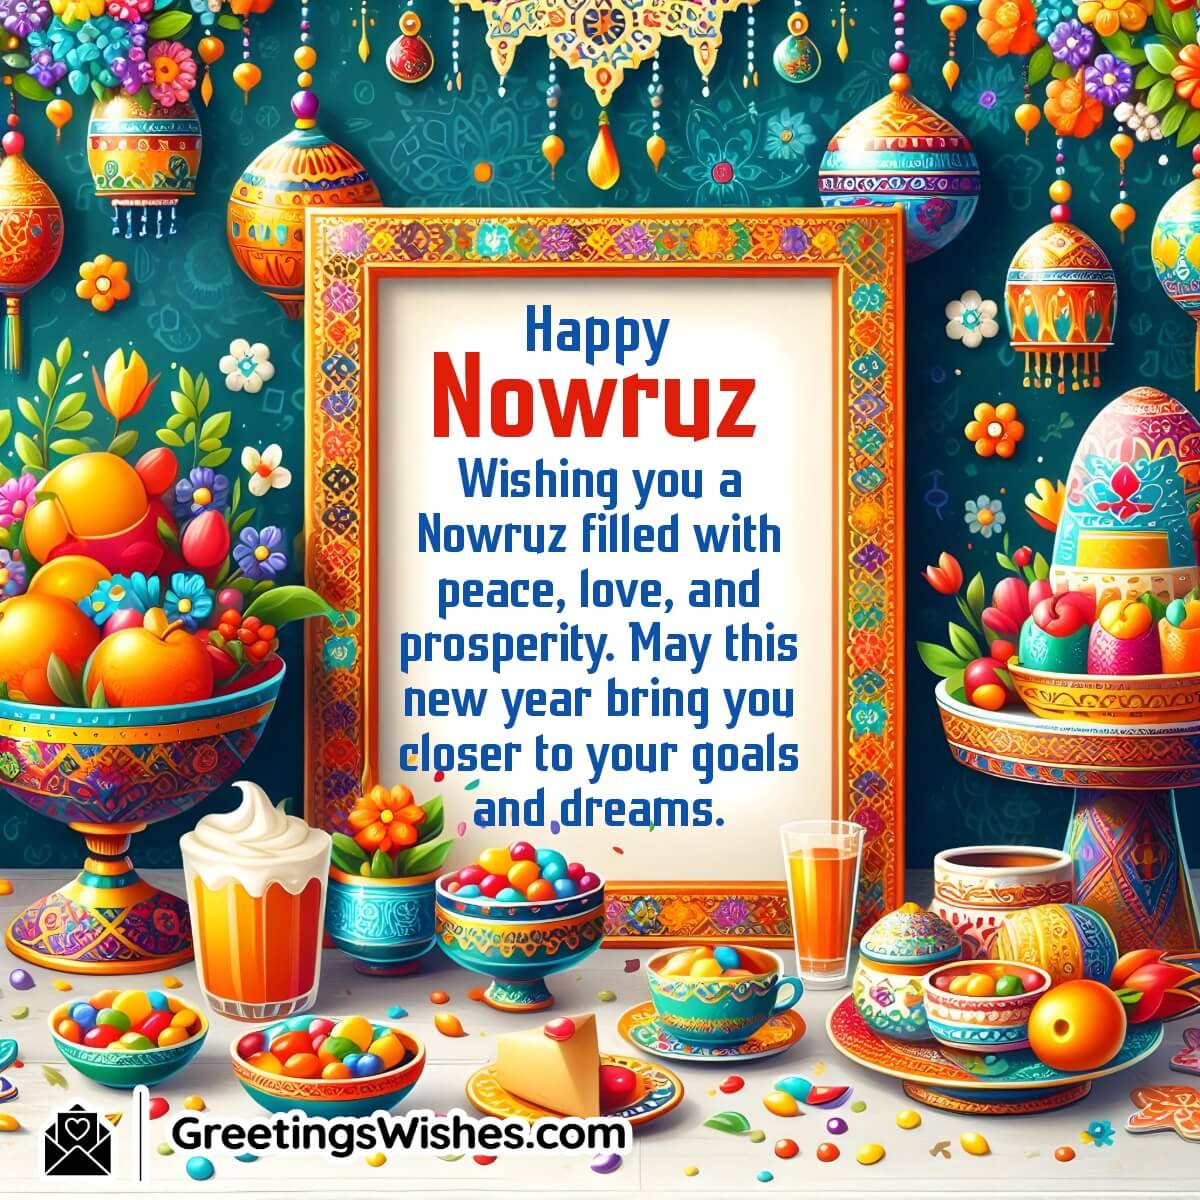 Nowruz Greetings Wishes Messages (20 March)